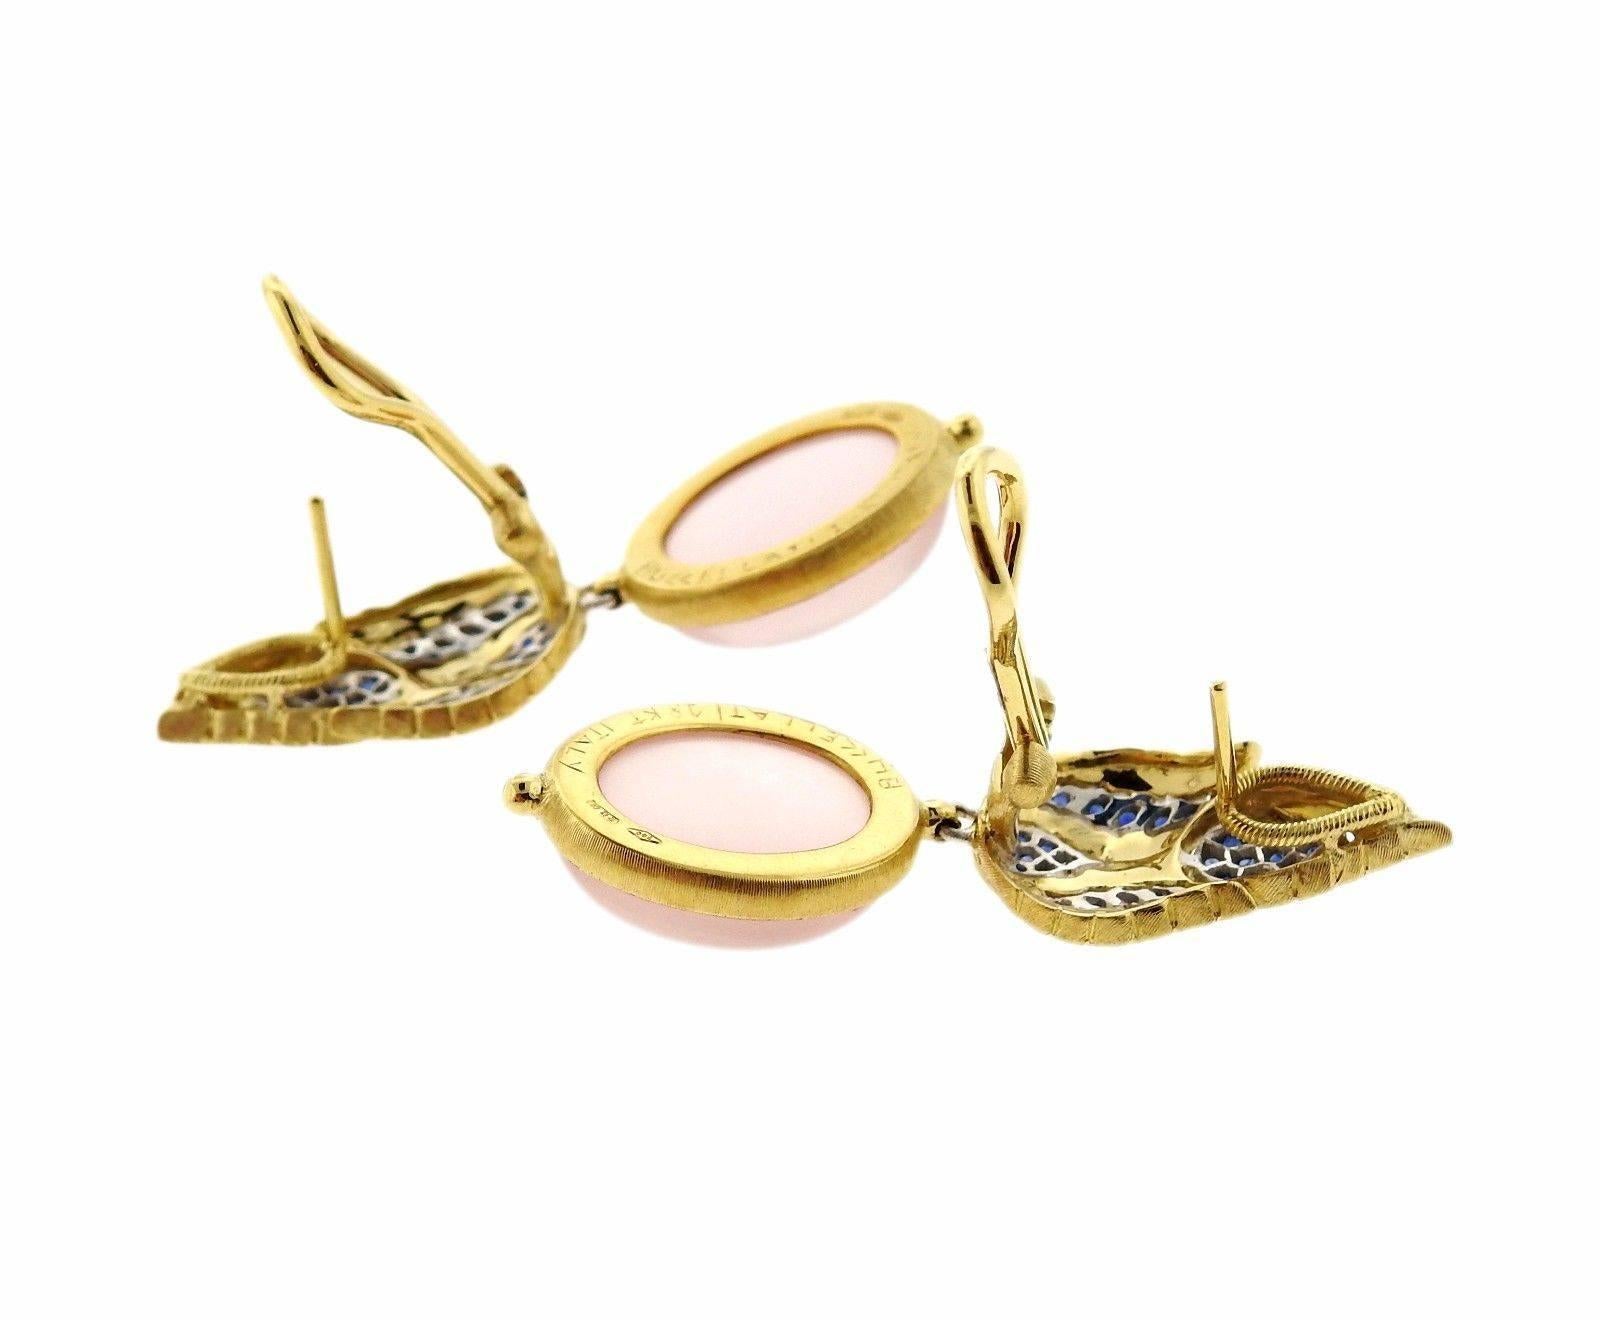 A pair of 18k yellow and white gold earrings set with sapphires and rose quartz cabochons.  The earrings measure 41mm x 14mm and weigh 16.2 grams.  Marked: 18k, Italy, Buccellati.